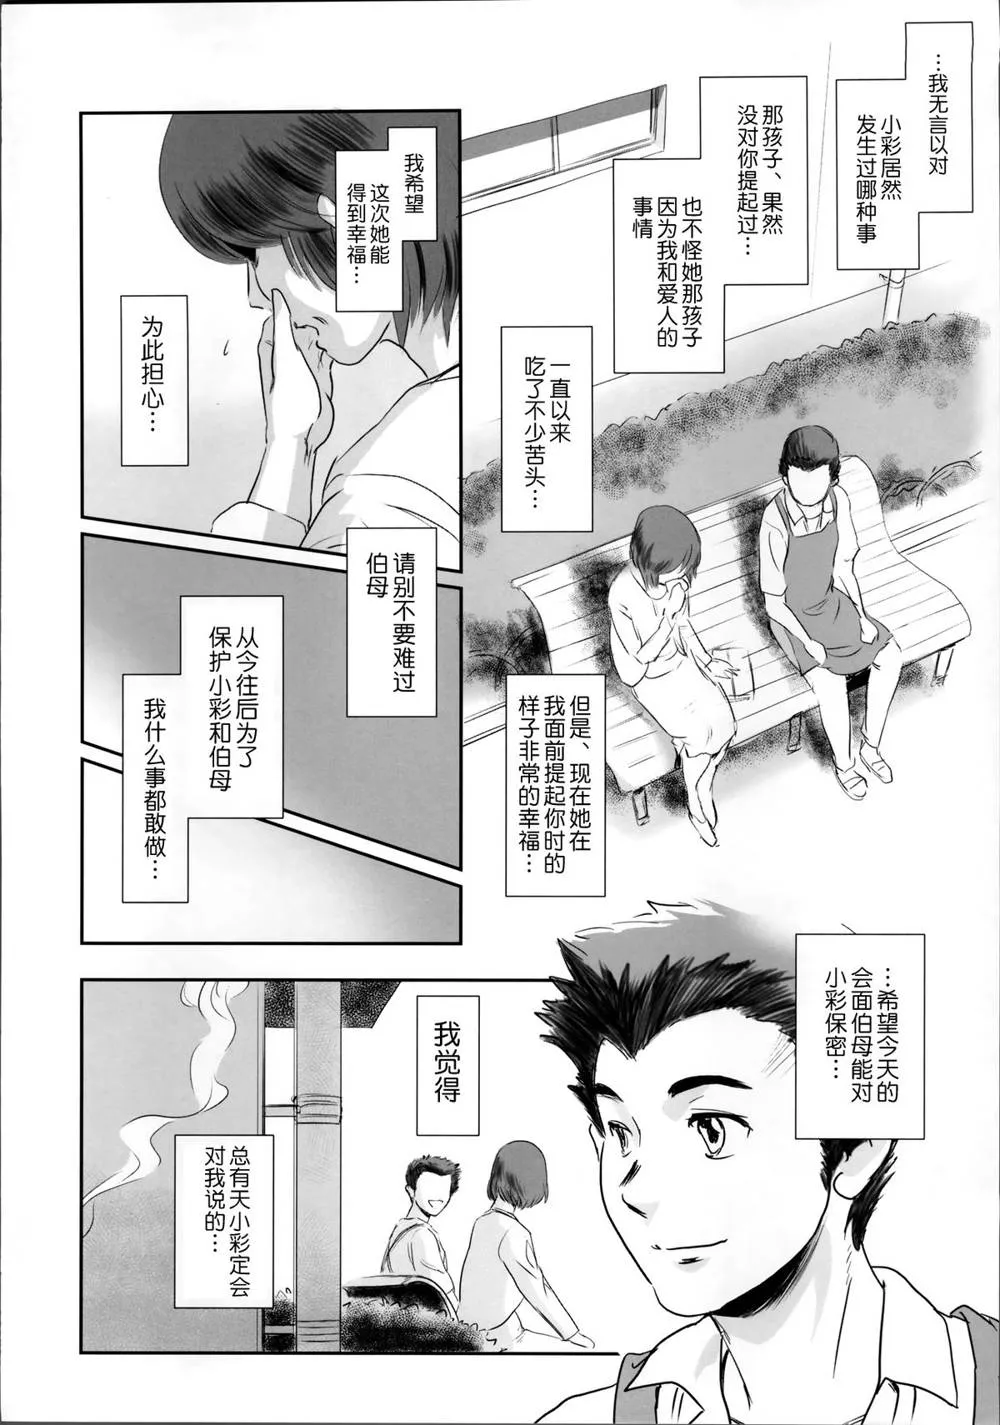 Original,Story Of The 'N' Situation – Situation#1 Kyouhaku [Chinese][第38页]